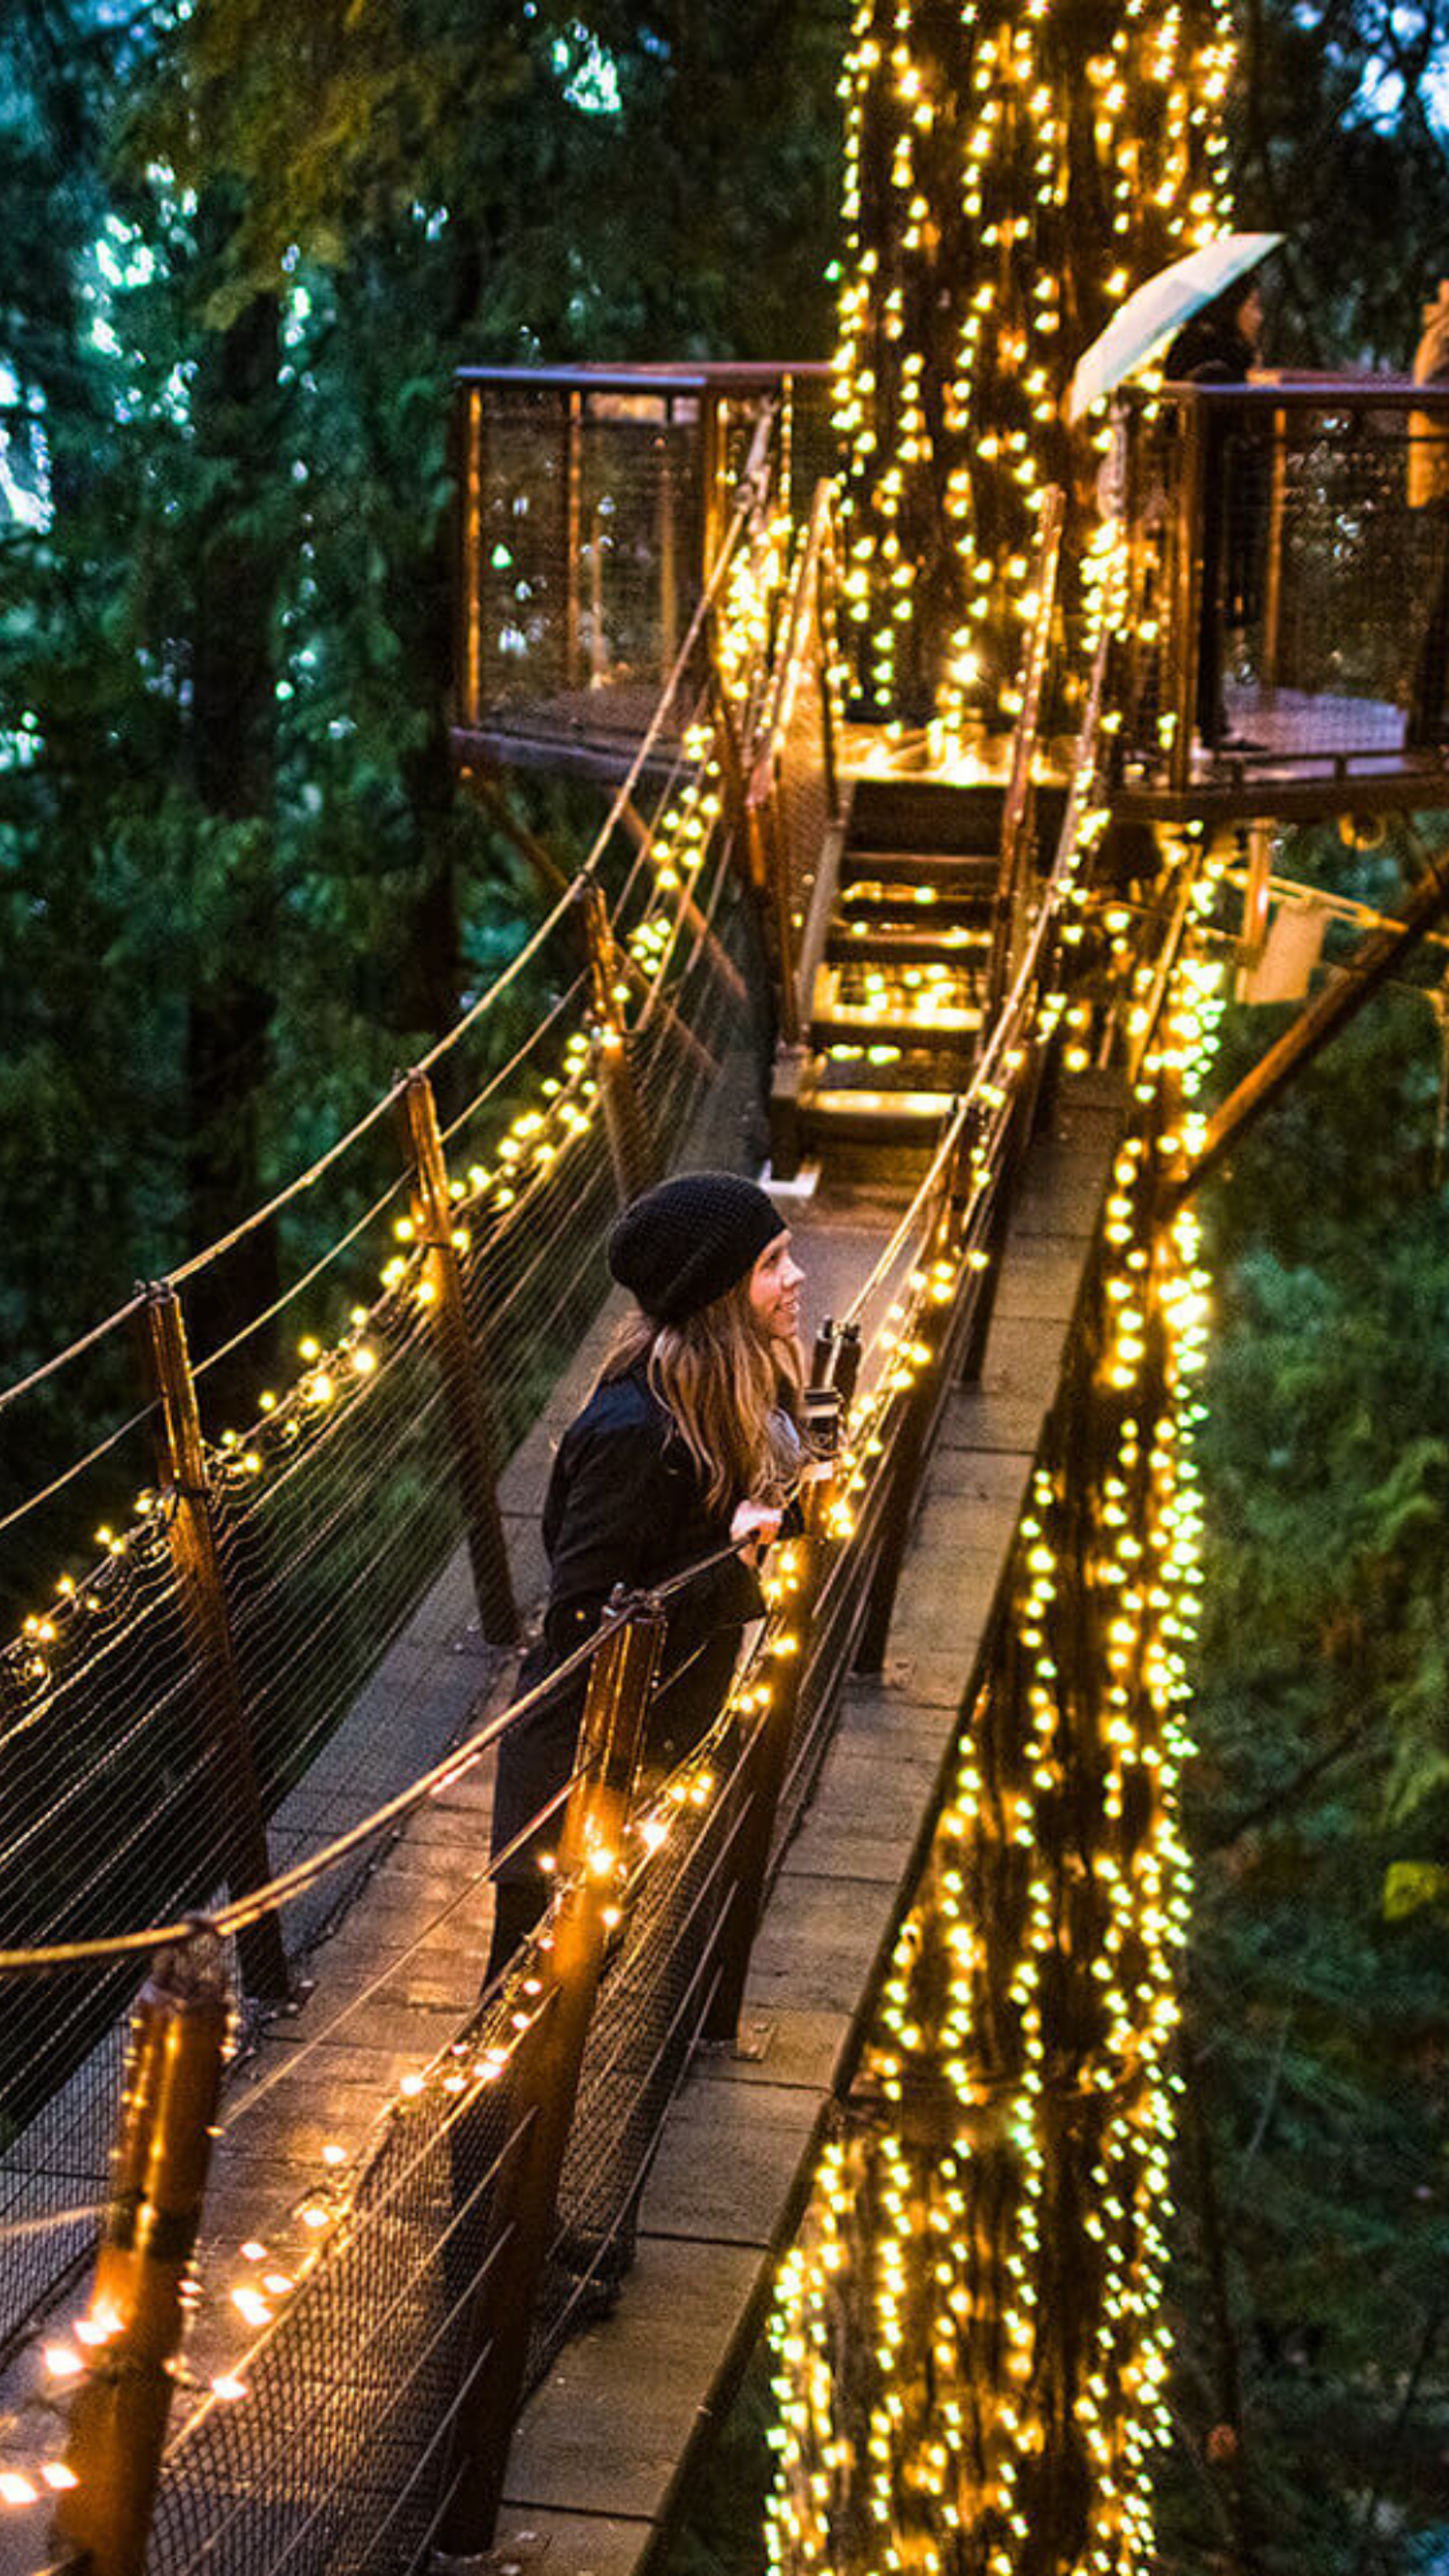 A woman enjoys a magical evening on a beautifully lit suspension bridge surrounded by dense forest.